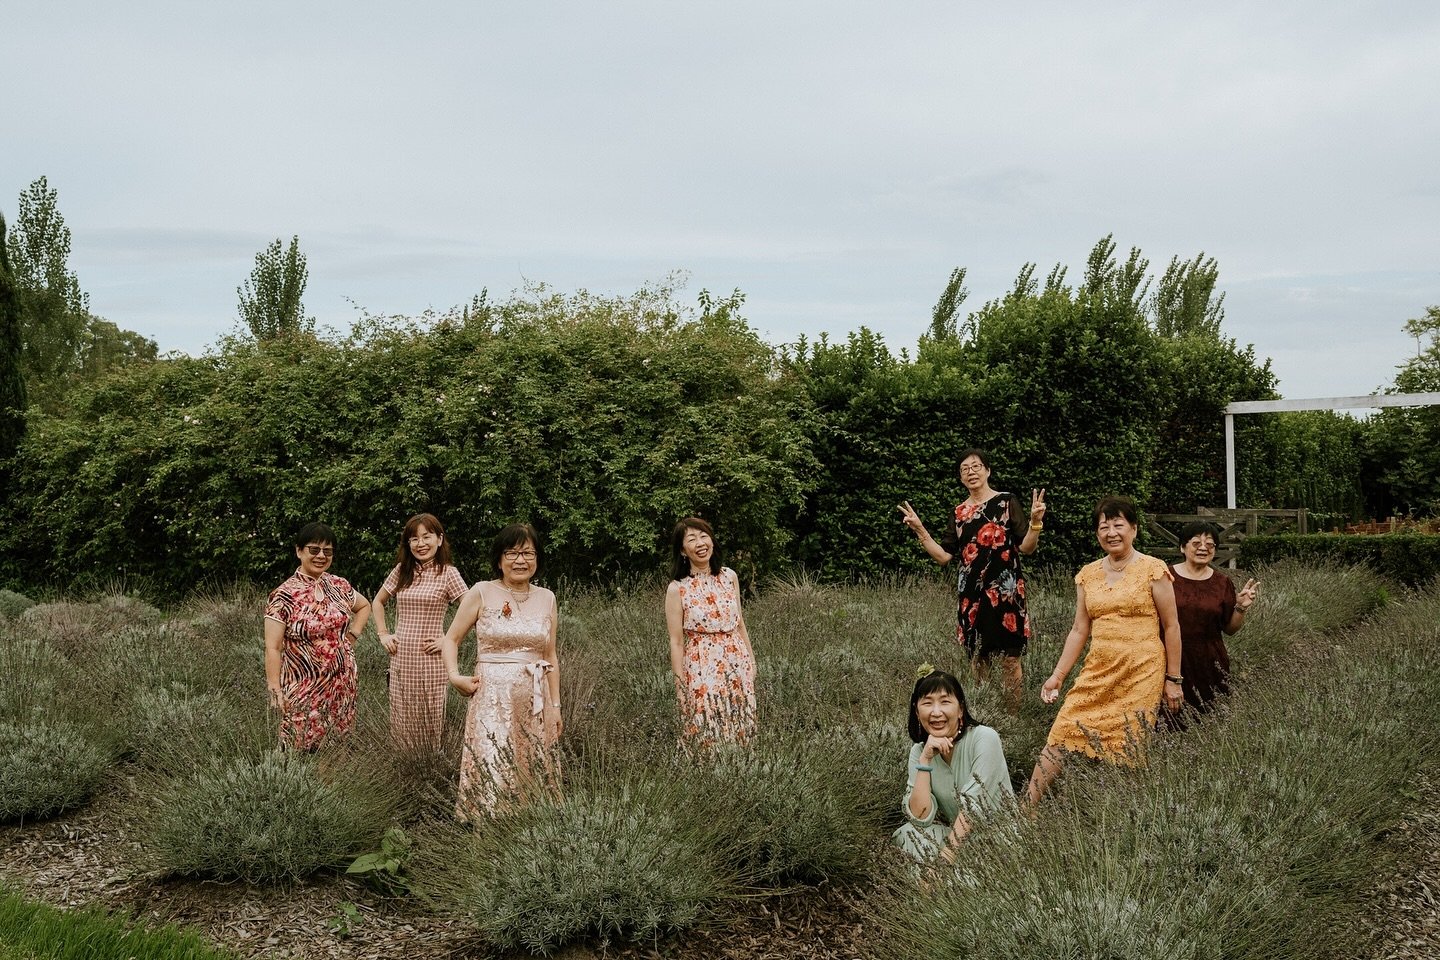 Family. Where would we be without them? 
Mish and Leong&rsquo;s families came from all around the world.
8 sisters, who haven&rsquo;t been gathered together for a while standing in a field like wildflowers, special moments in time for not only Mish a